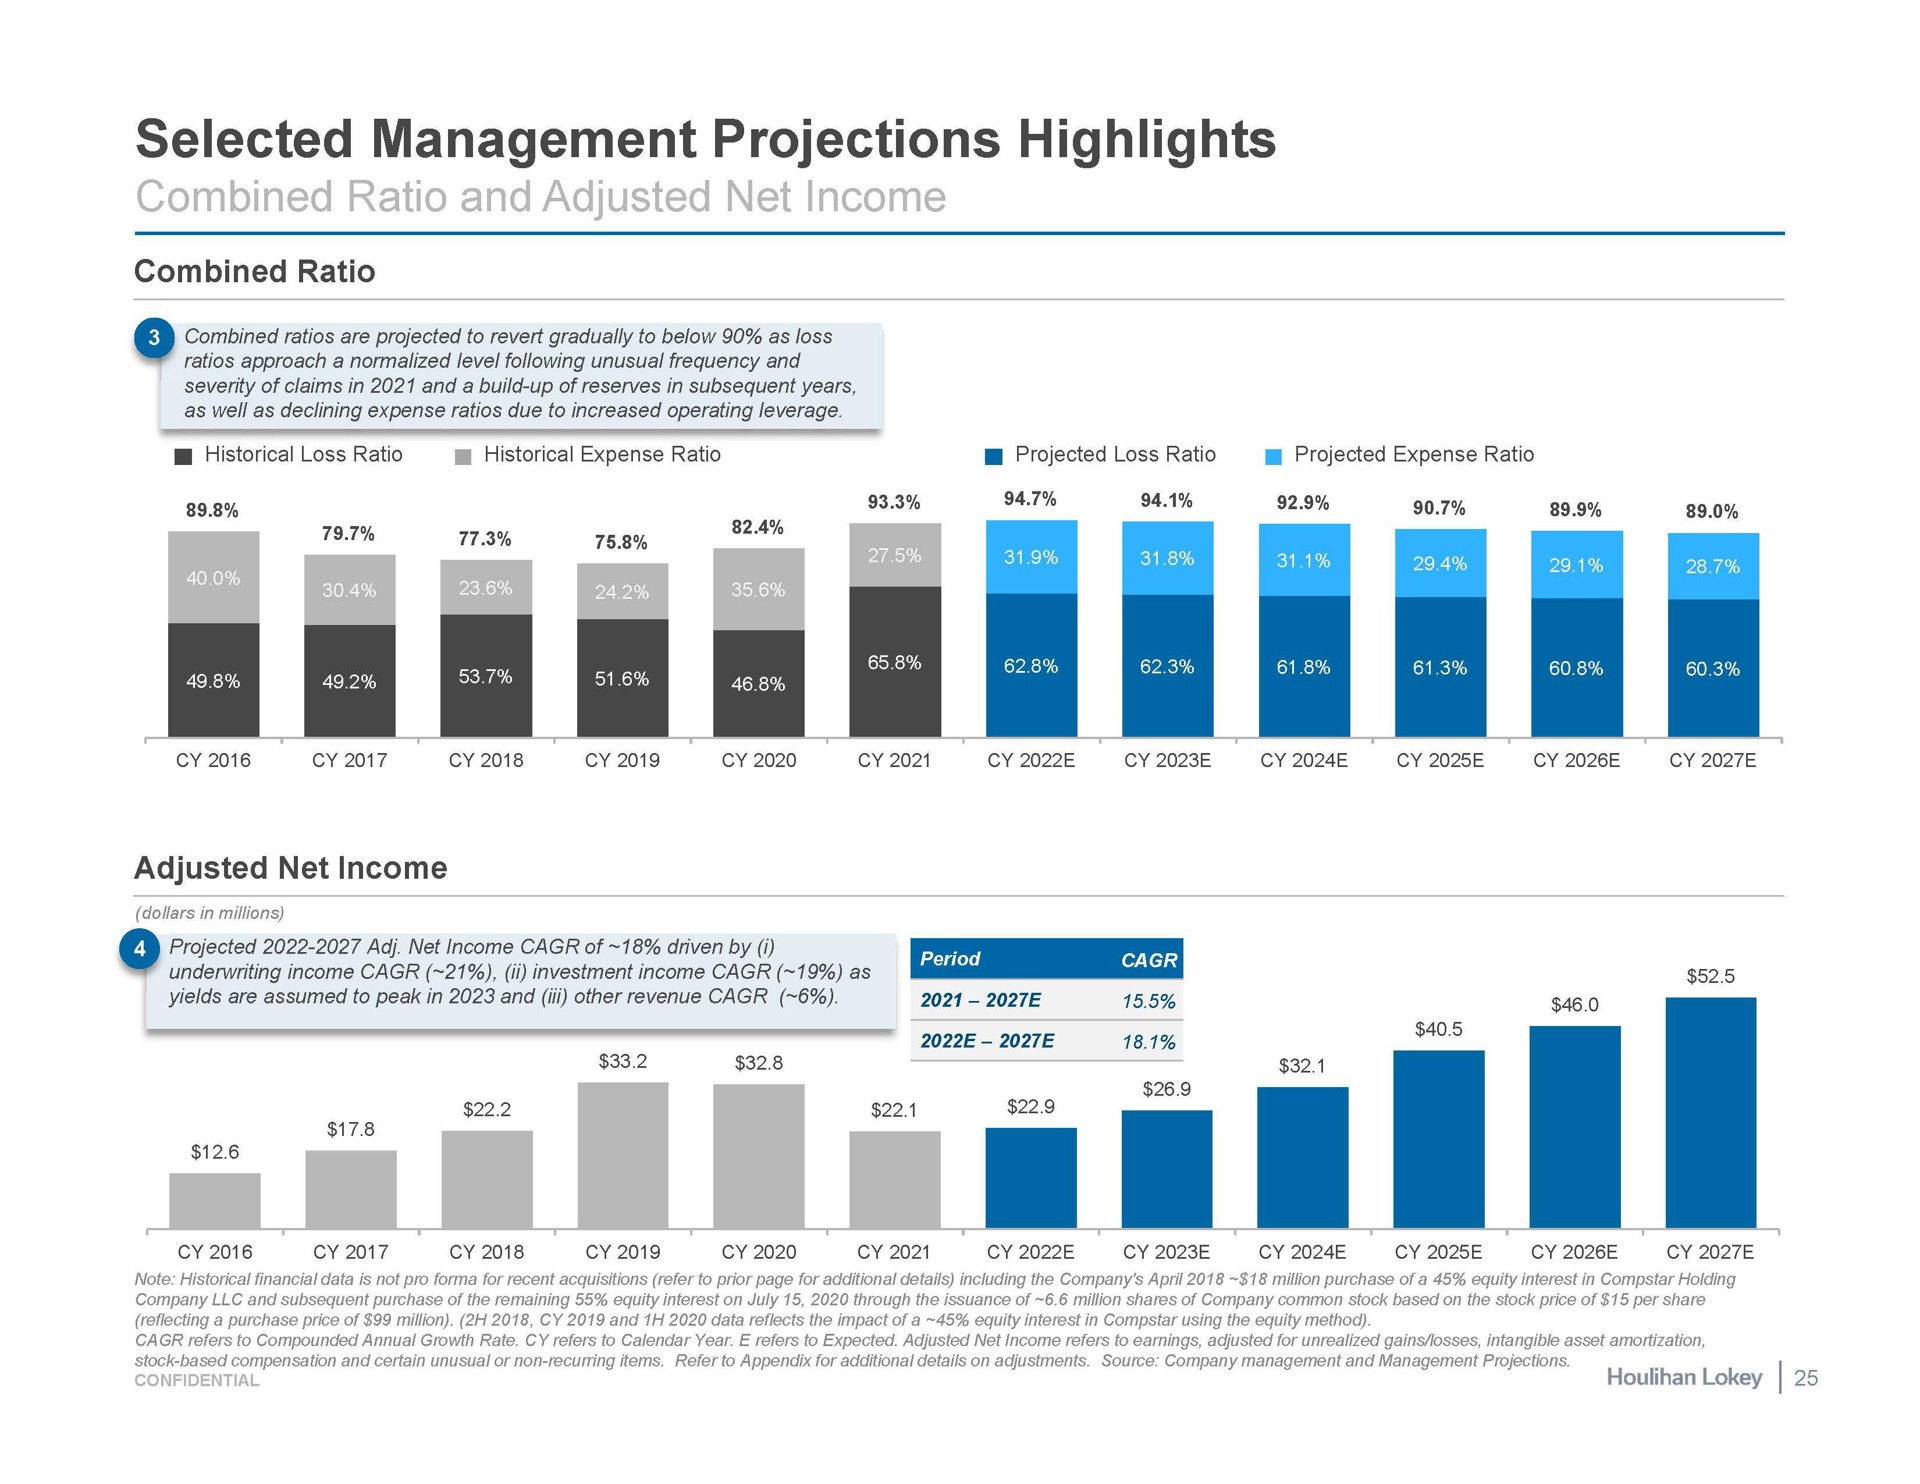 selected management projections highlights combined ratio adjusted net income projected net income of driven by i | Houlihan Lokey